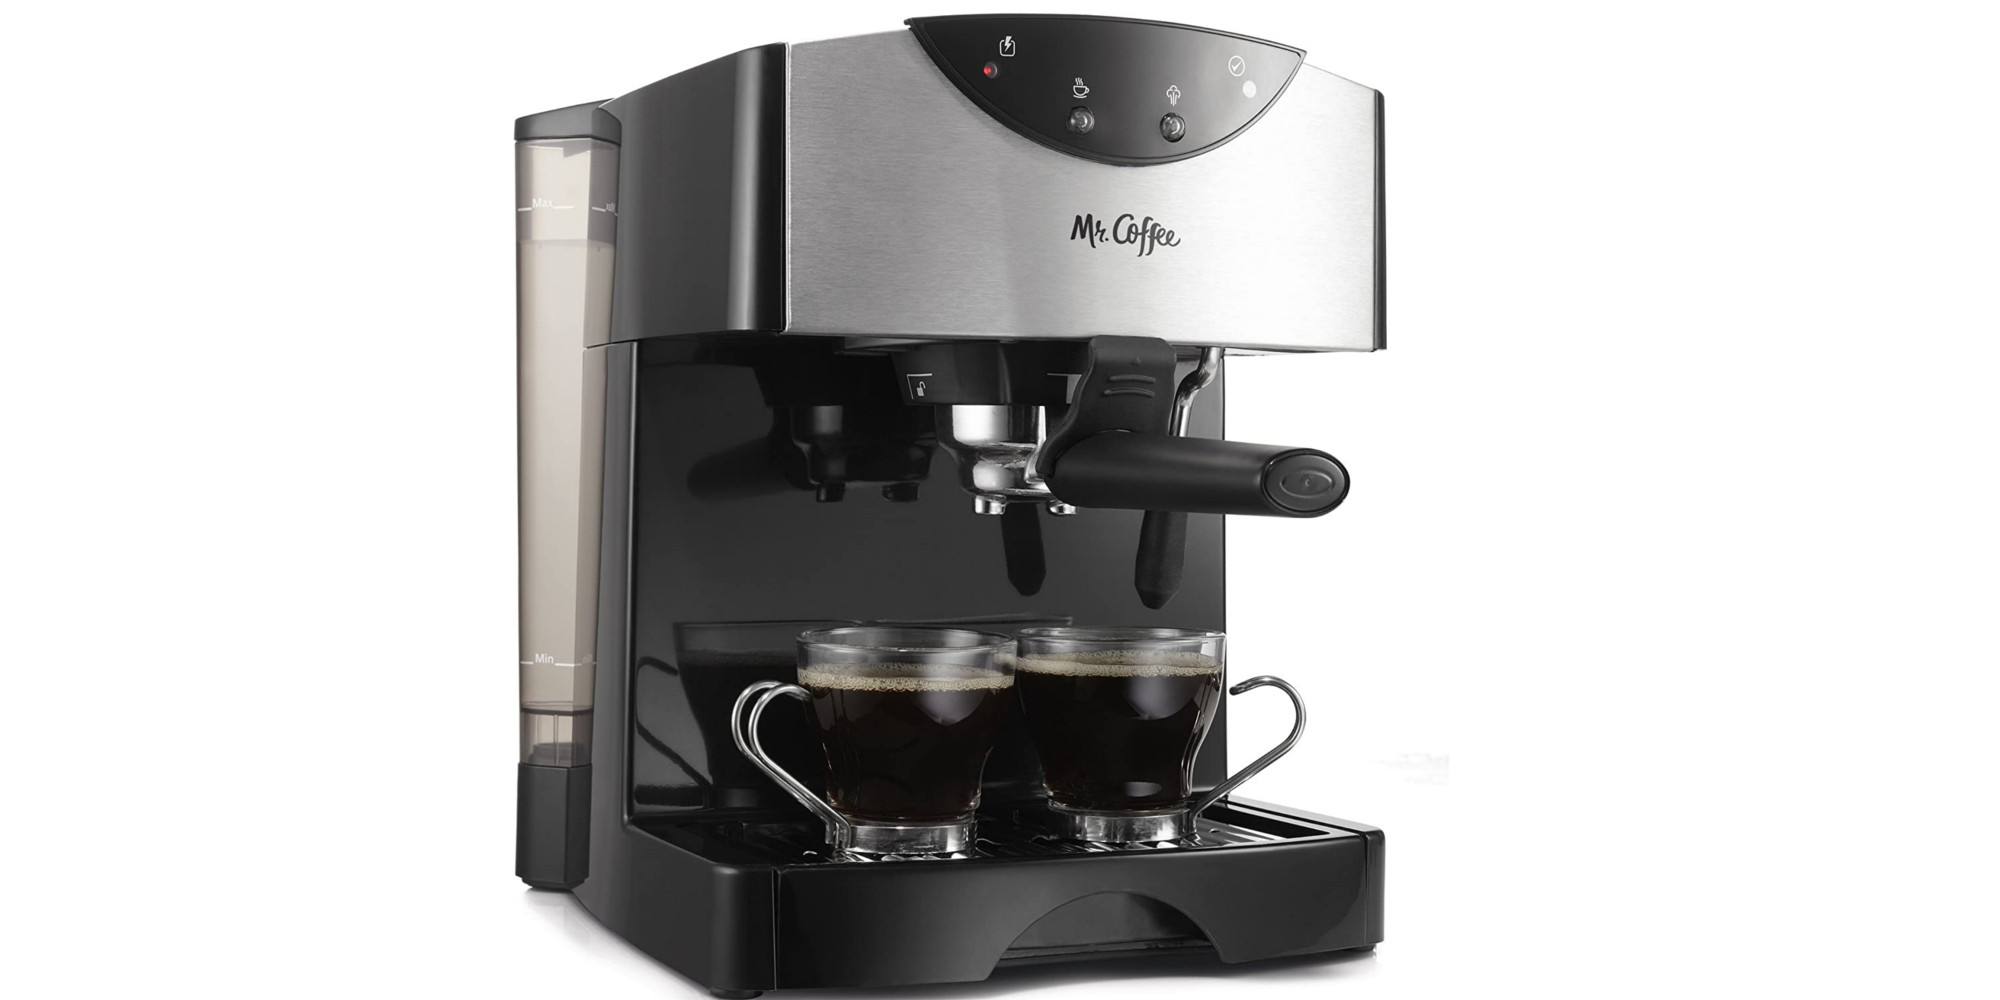 https://9to5toys.com/wp-content/uploads/sites/5/2020/04/Mr.-Coffee-Automatic-Dual-Shot-Espresso-Cappuccino-System-ECMP50.jpg